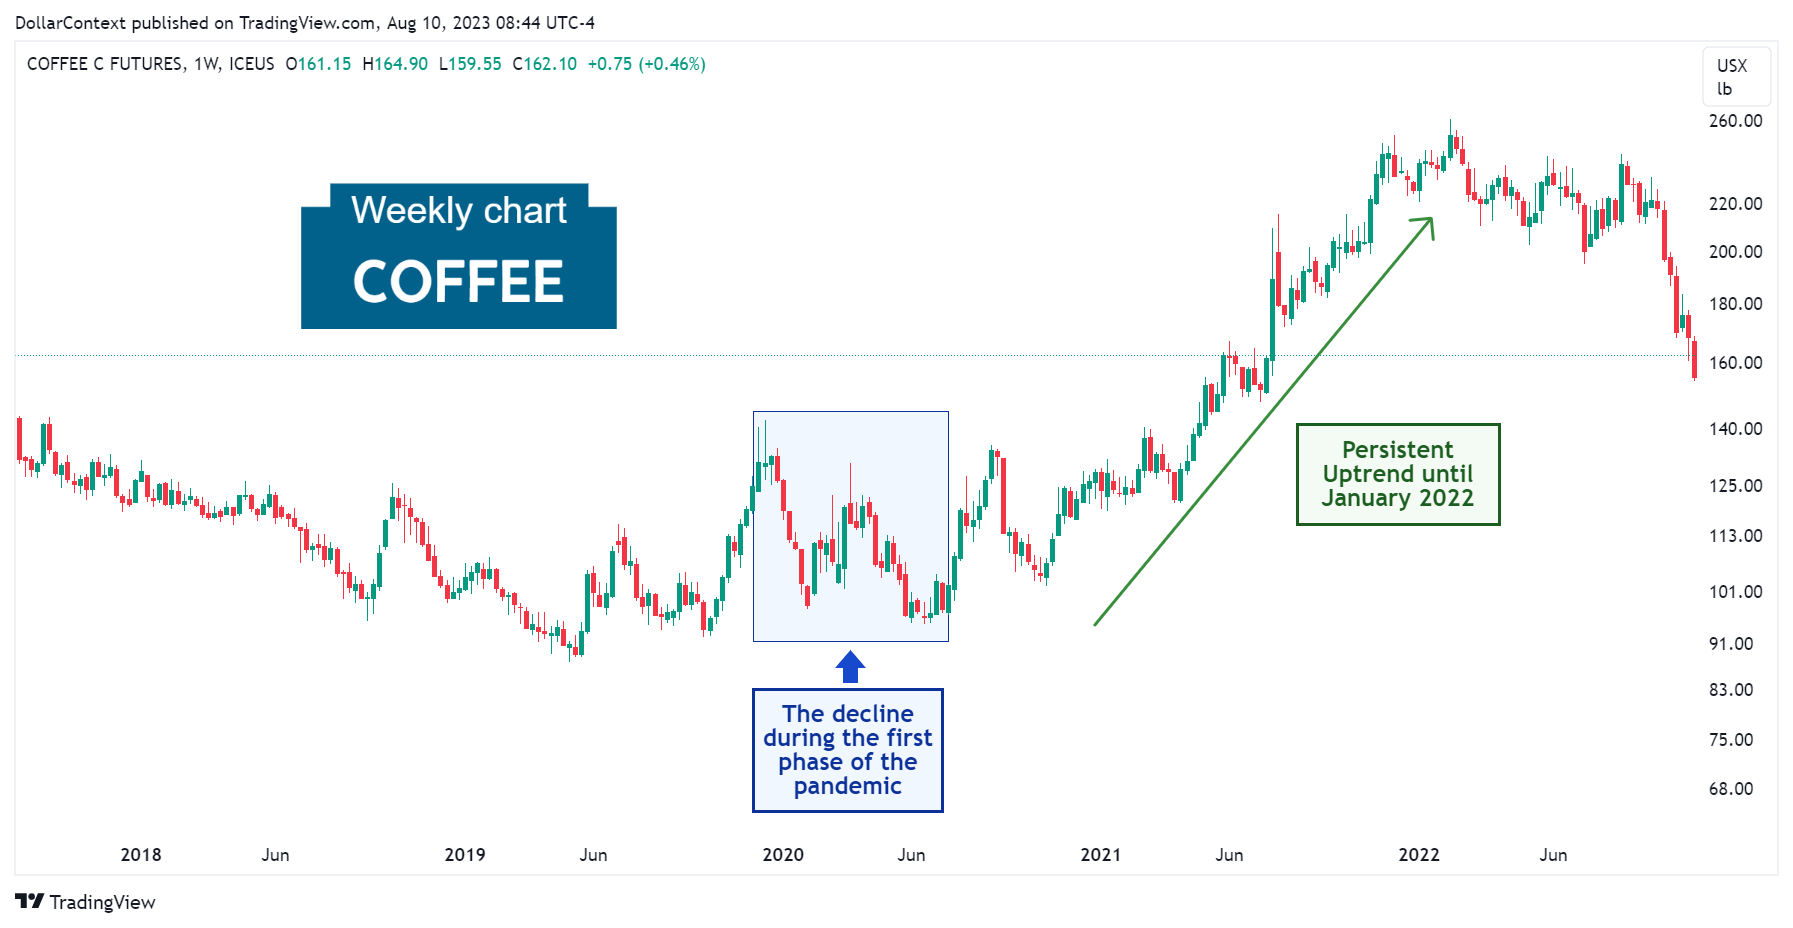 Strong Uptrend in Coffee Prices After the Initial Phase of the Pandemic